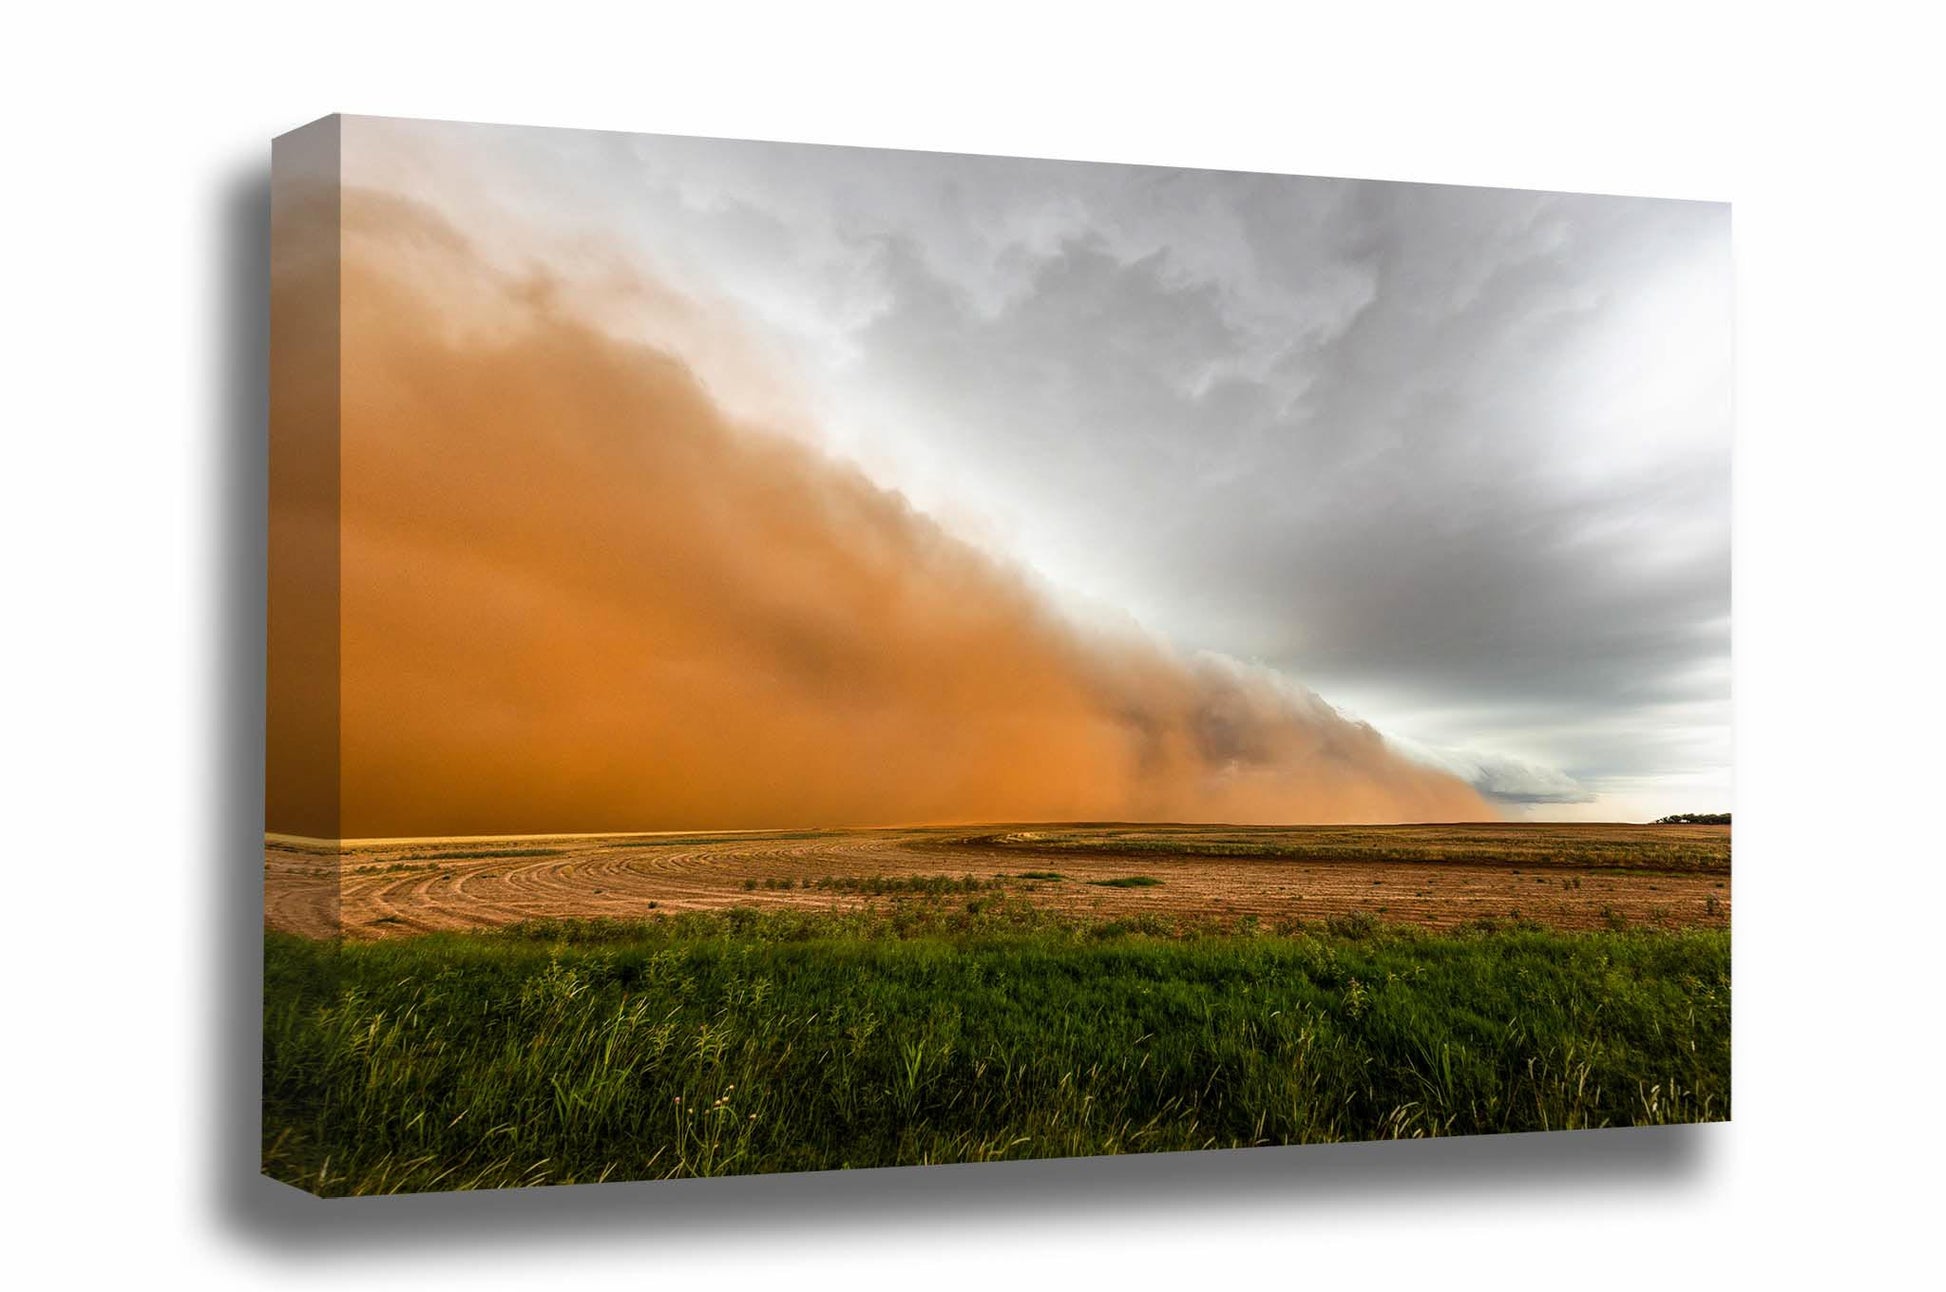 Haboob canvas wall art of a dust storm sweeping over a field on a stormy spring day in Texas by Sean Ramsey of Southern Plains Photography.